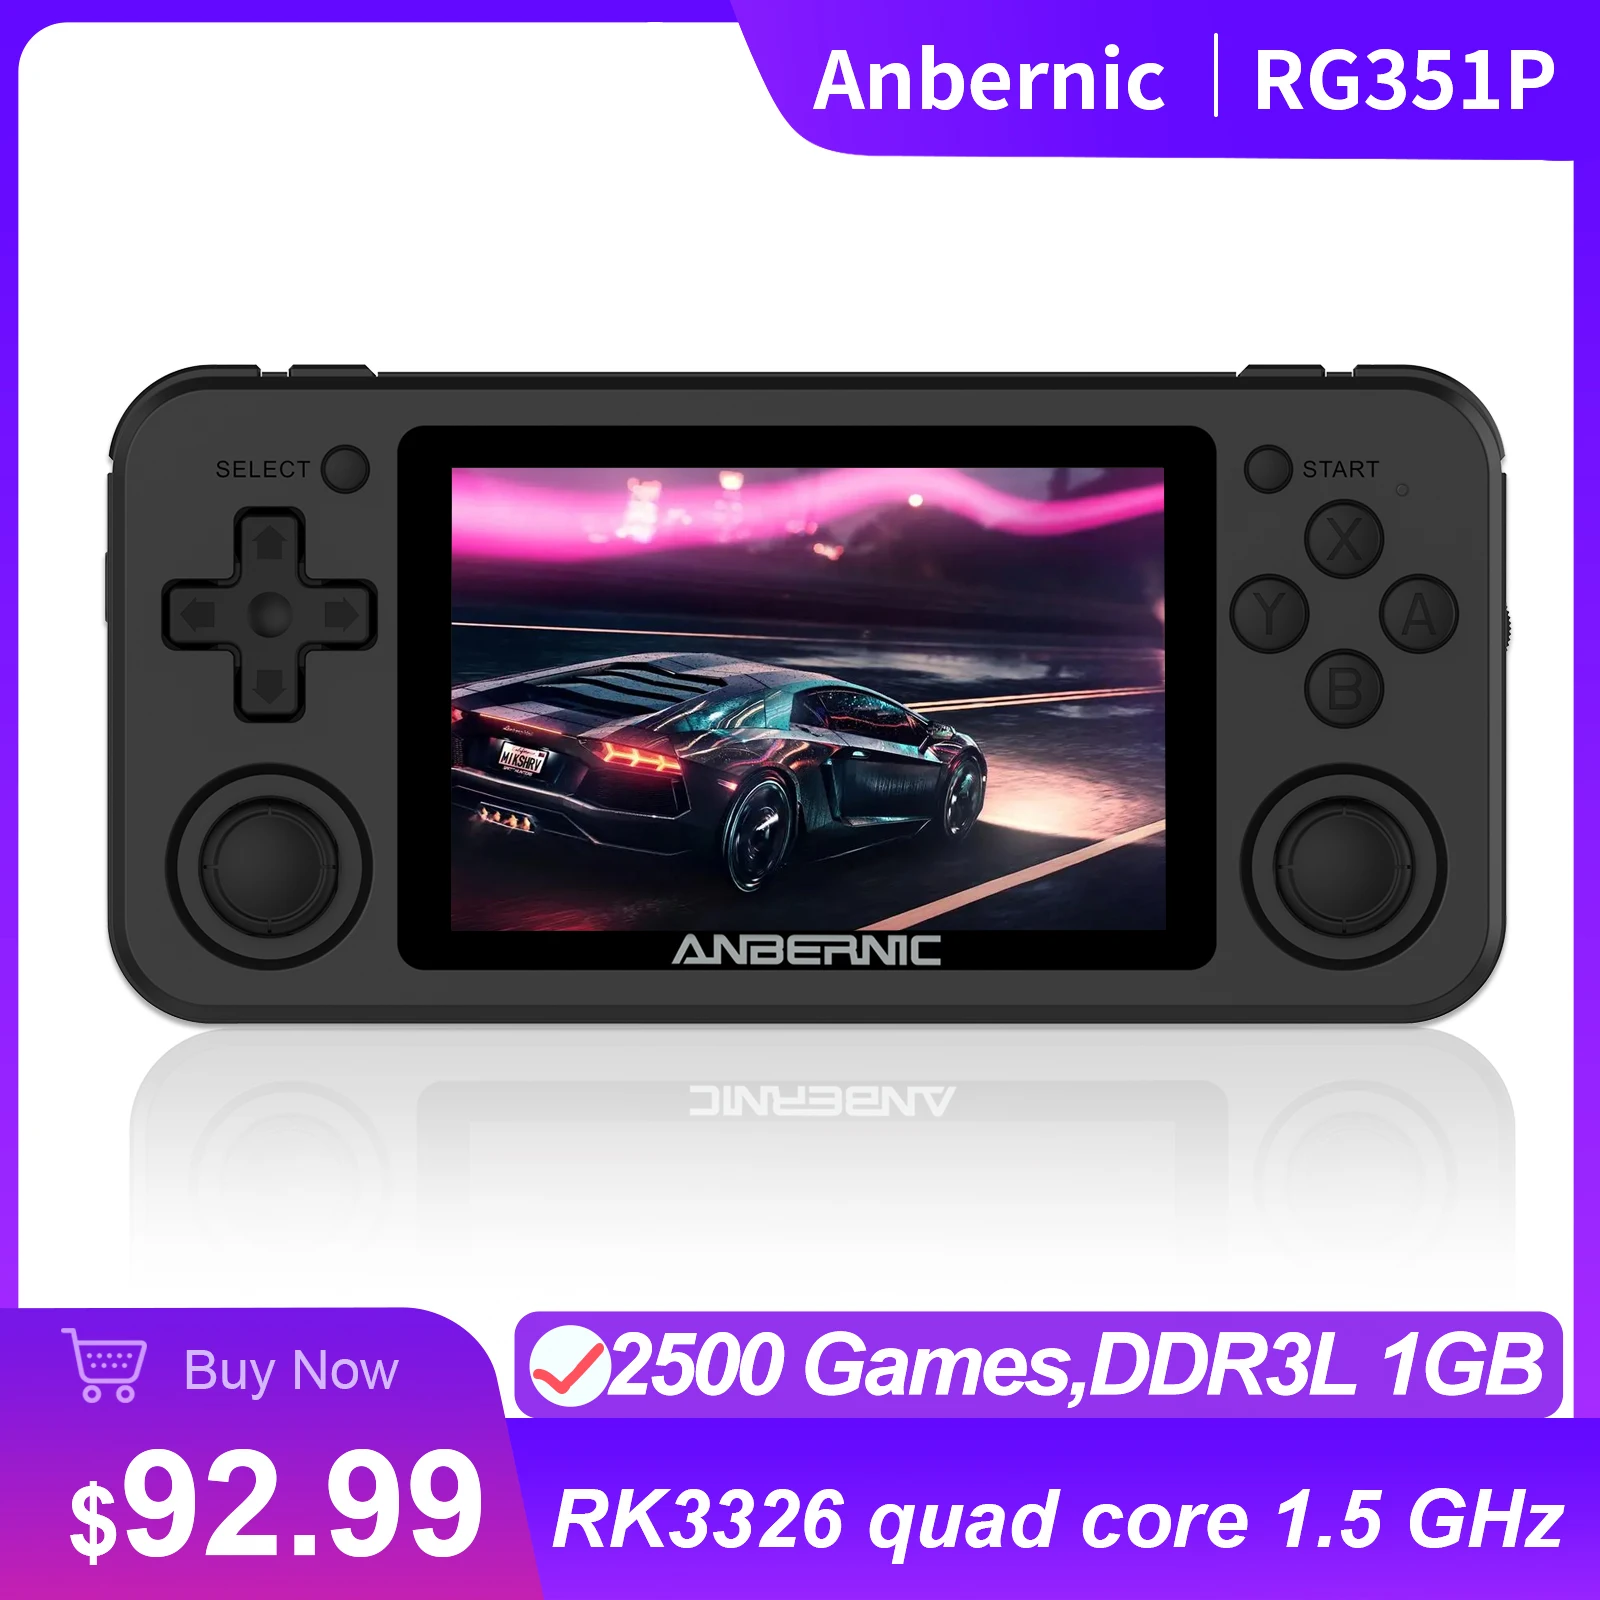 

ANBERNIC RG351P Retro Video Game Console RK3326 1.5GHz 3.5-inch IPS Screen 64GB 2500 Game wifi Portable Handheld Game Player